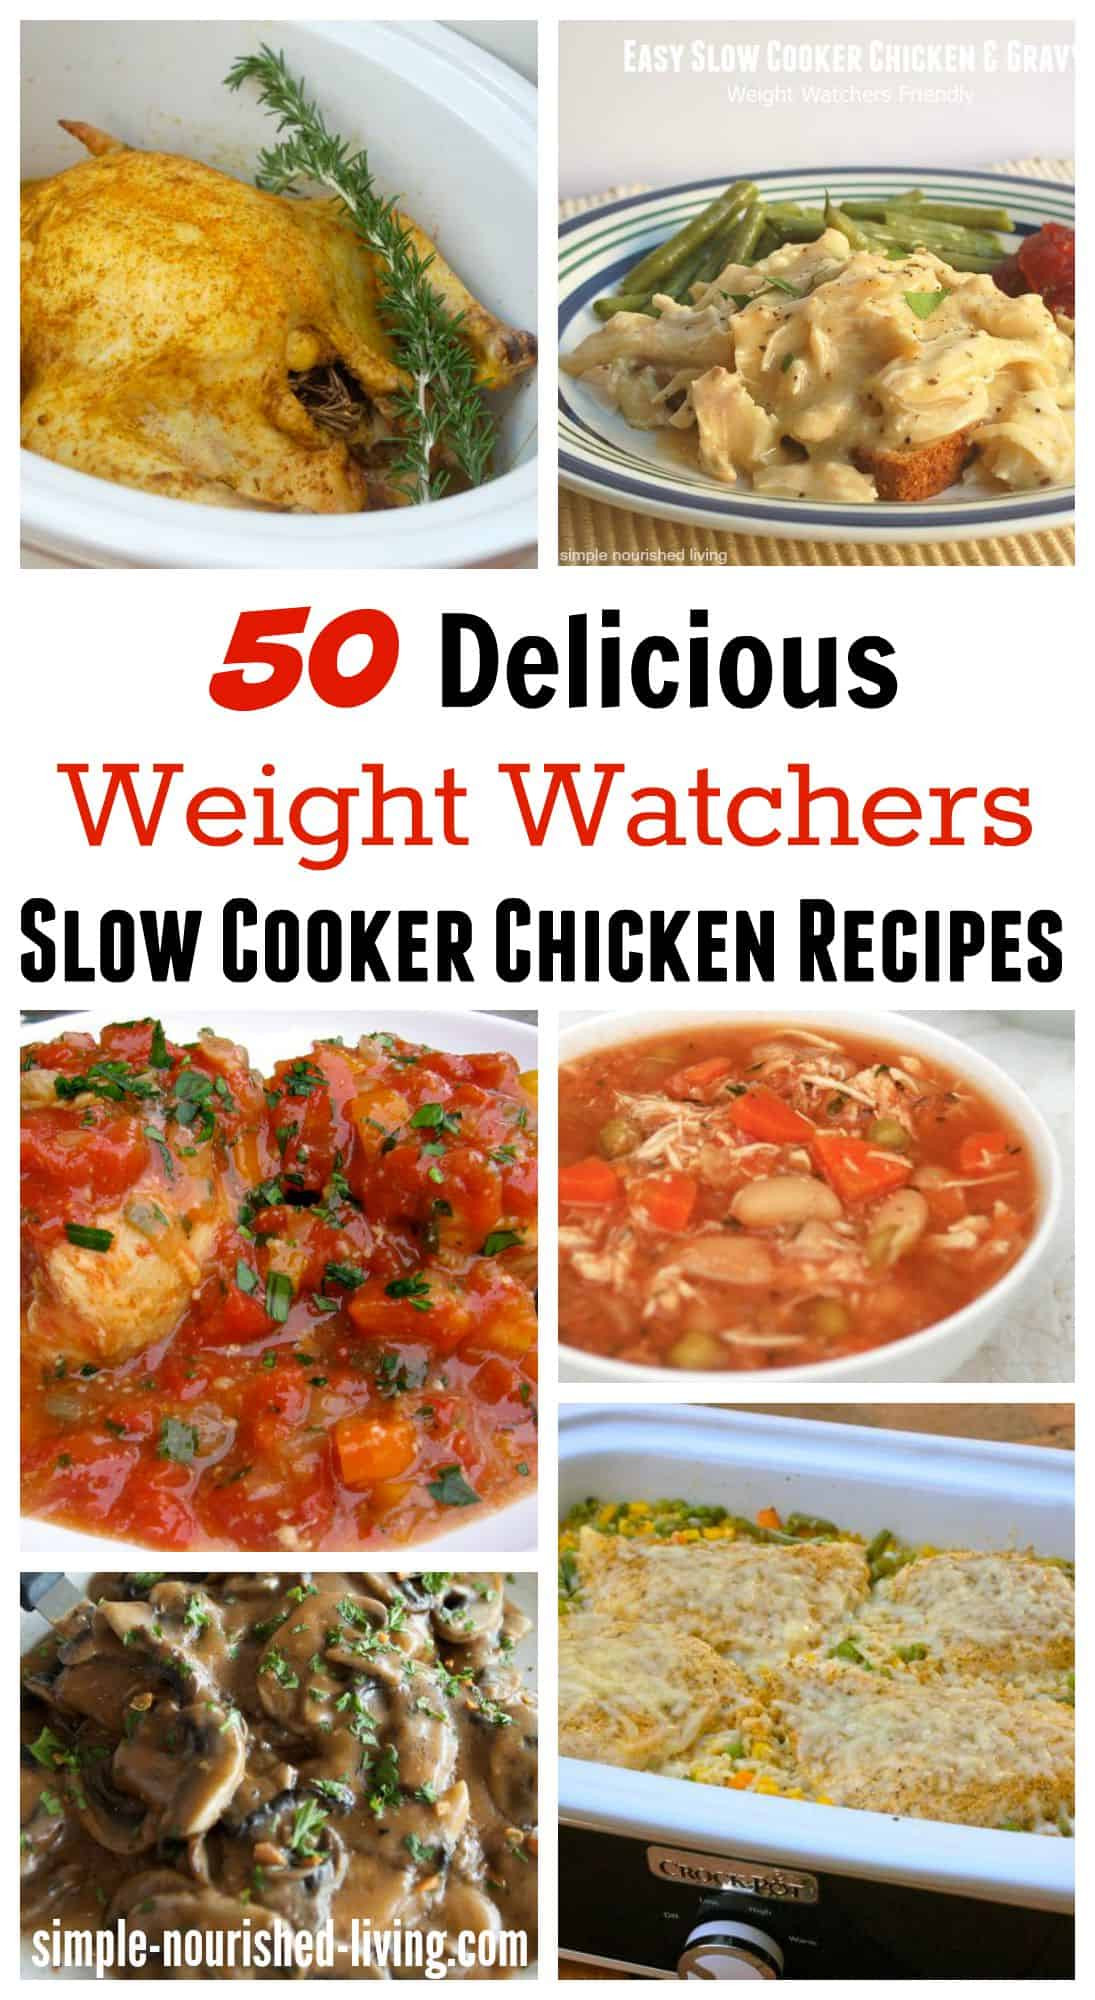 Easy Healthy Slow Cooker Chicken Recipes
 Healthy Slow Cooker Chicken Recipes for Weight Watchers